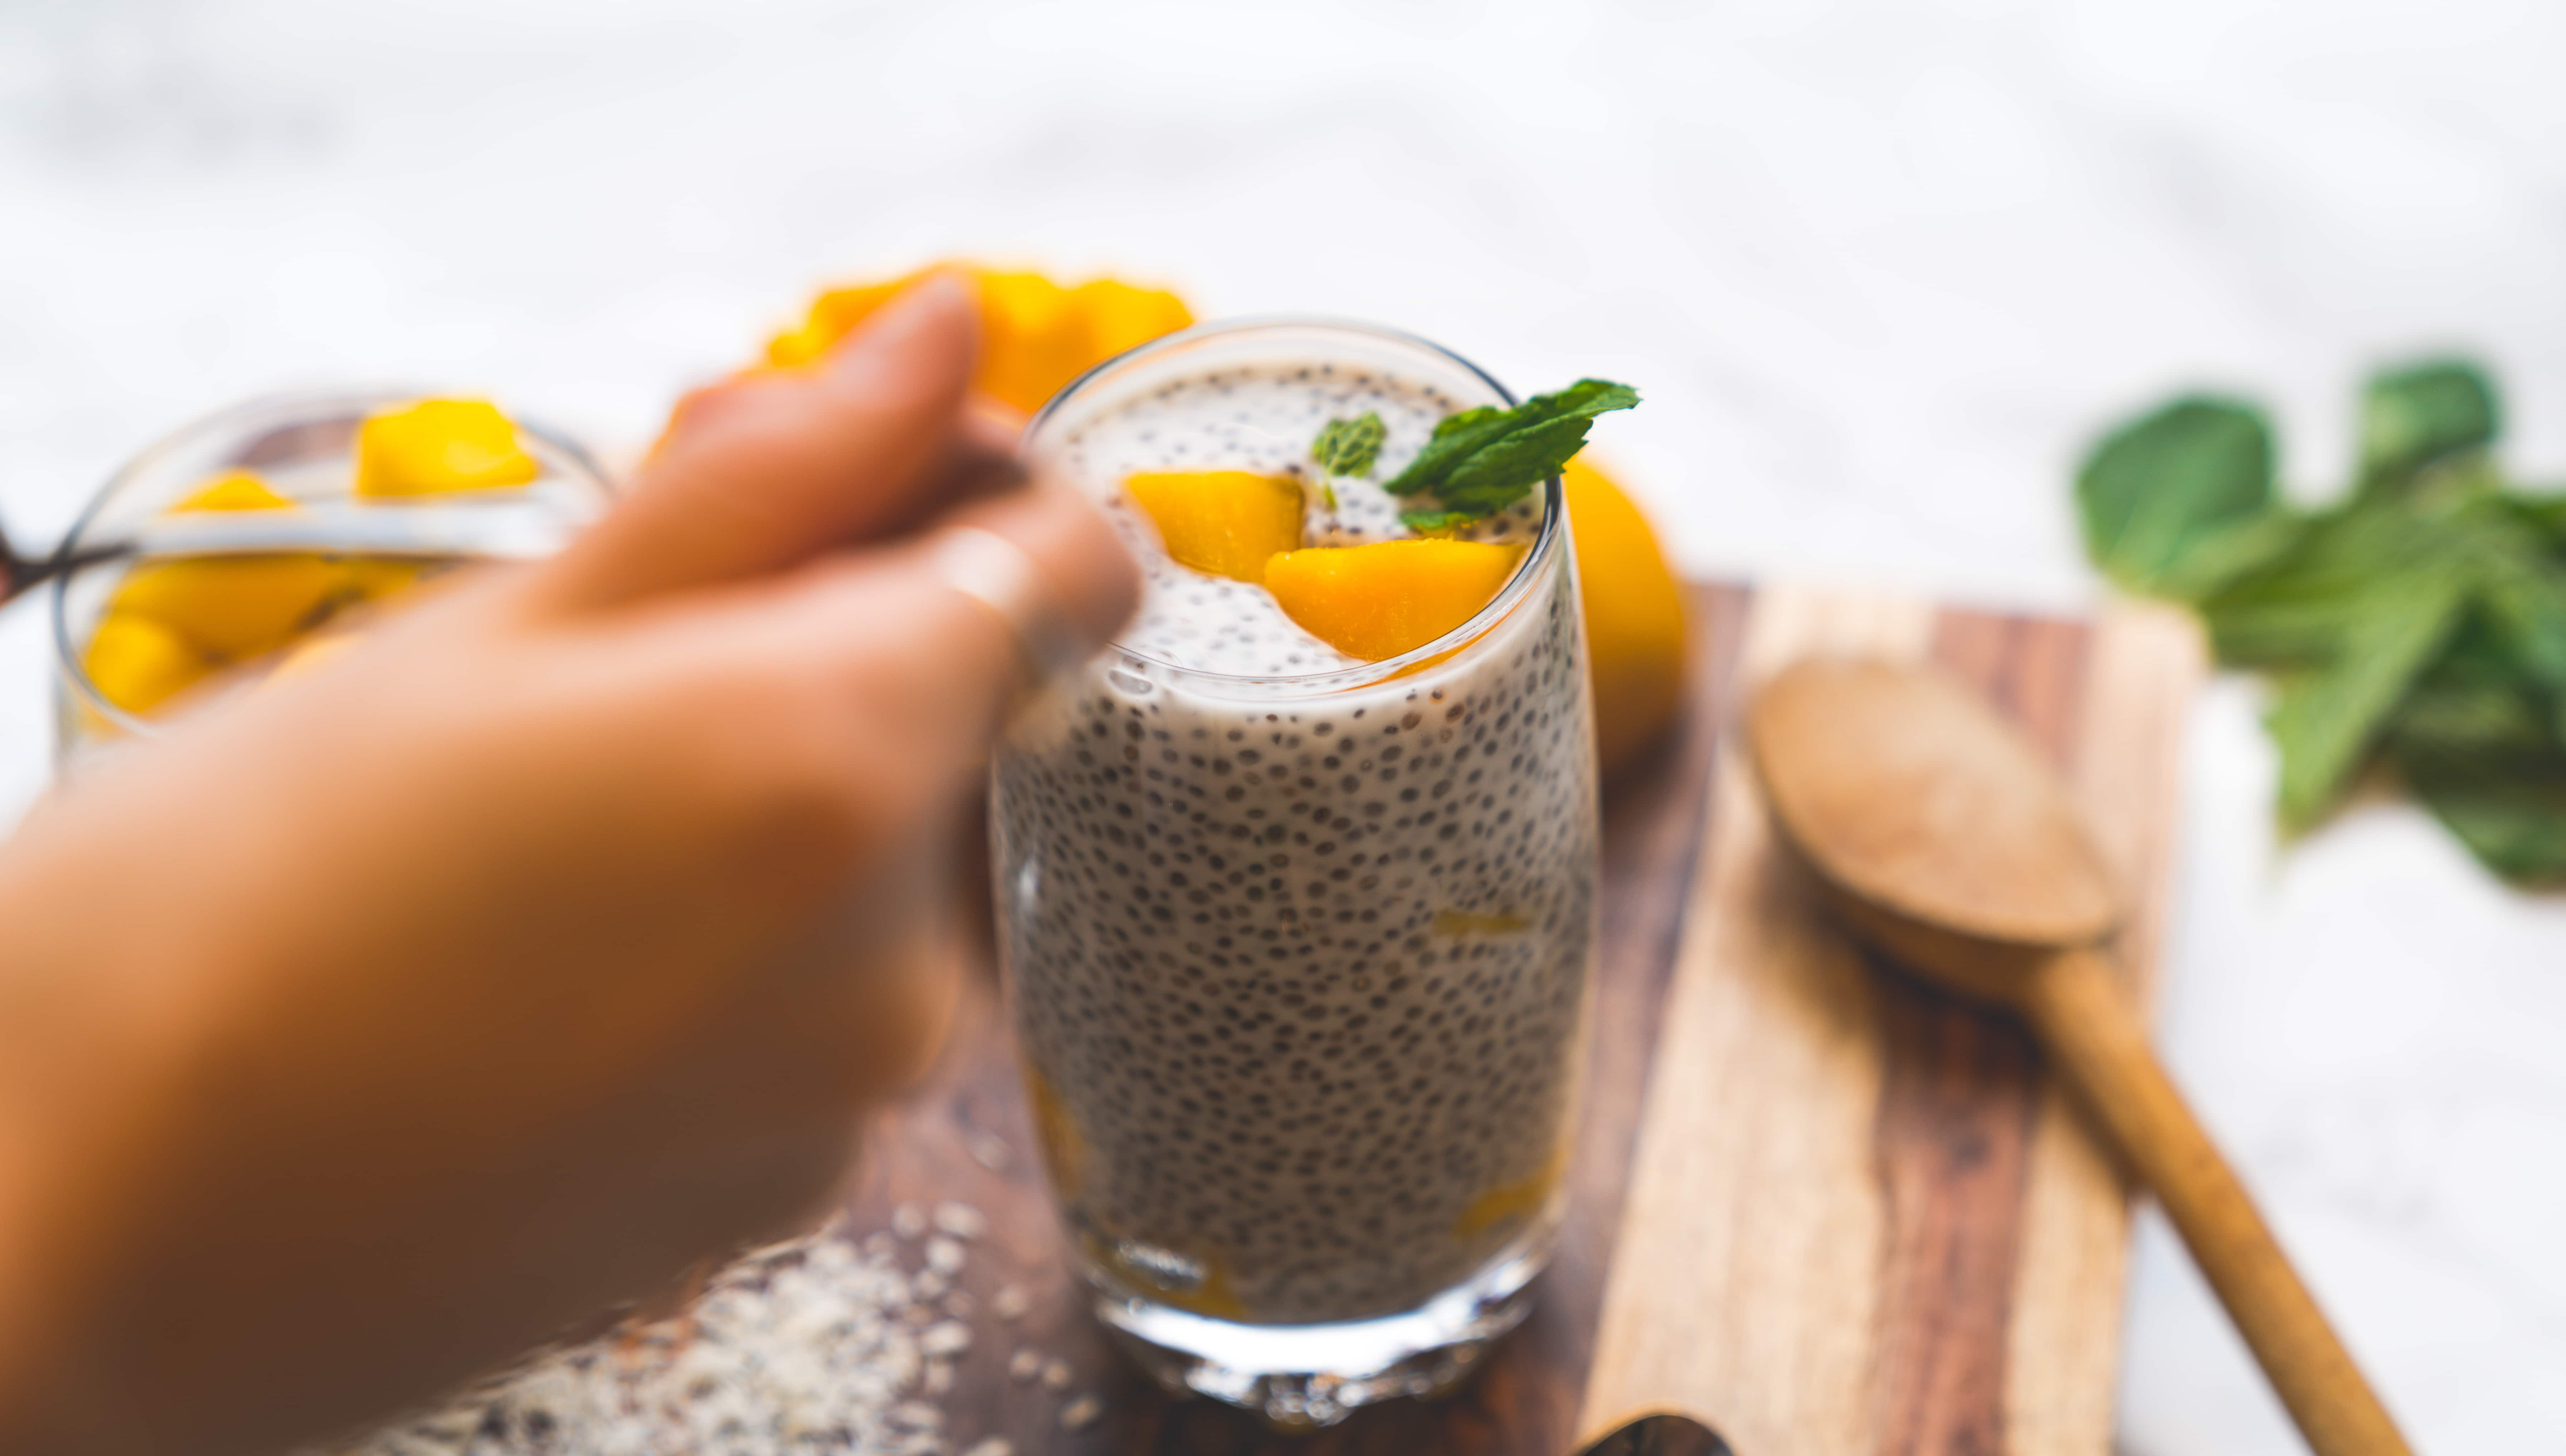 chia seeds - foods for strong bones